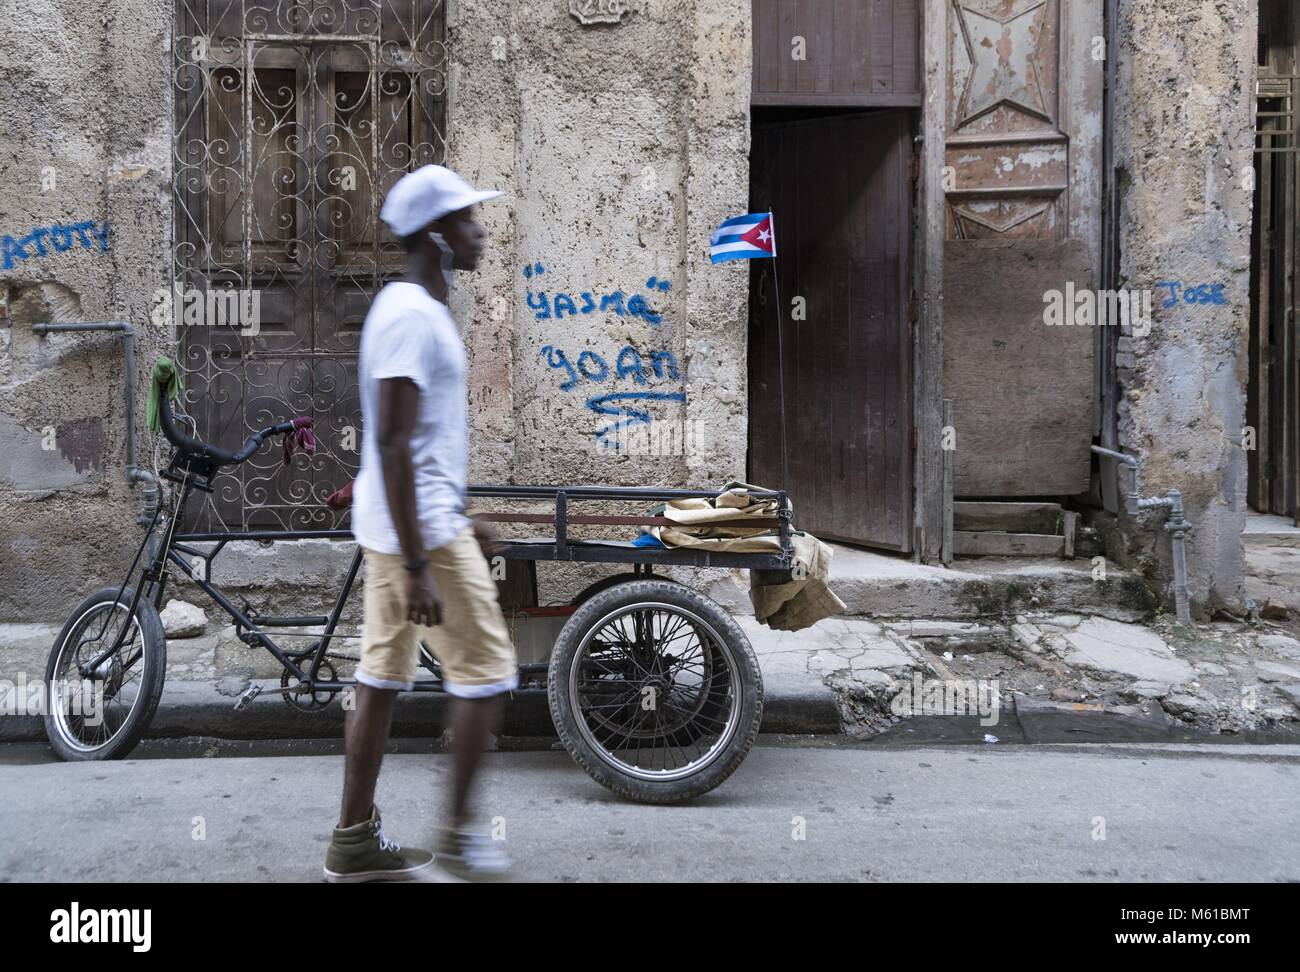 A young man walks through an alley in Havana's old town, where a cargo bike is parked. (16 November 2017) | usage worldwide Stock Photo